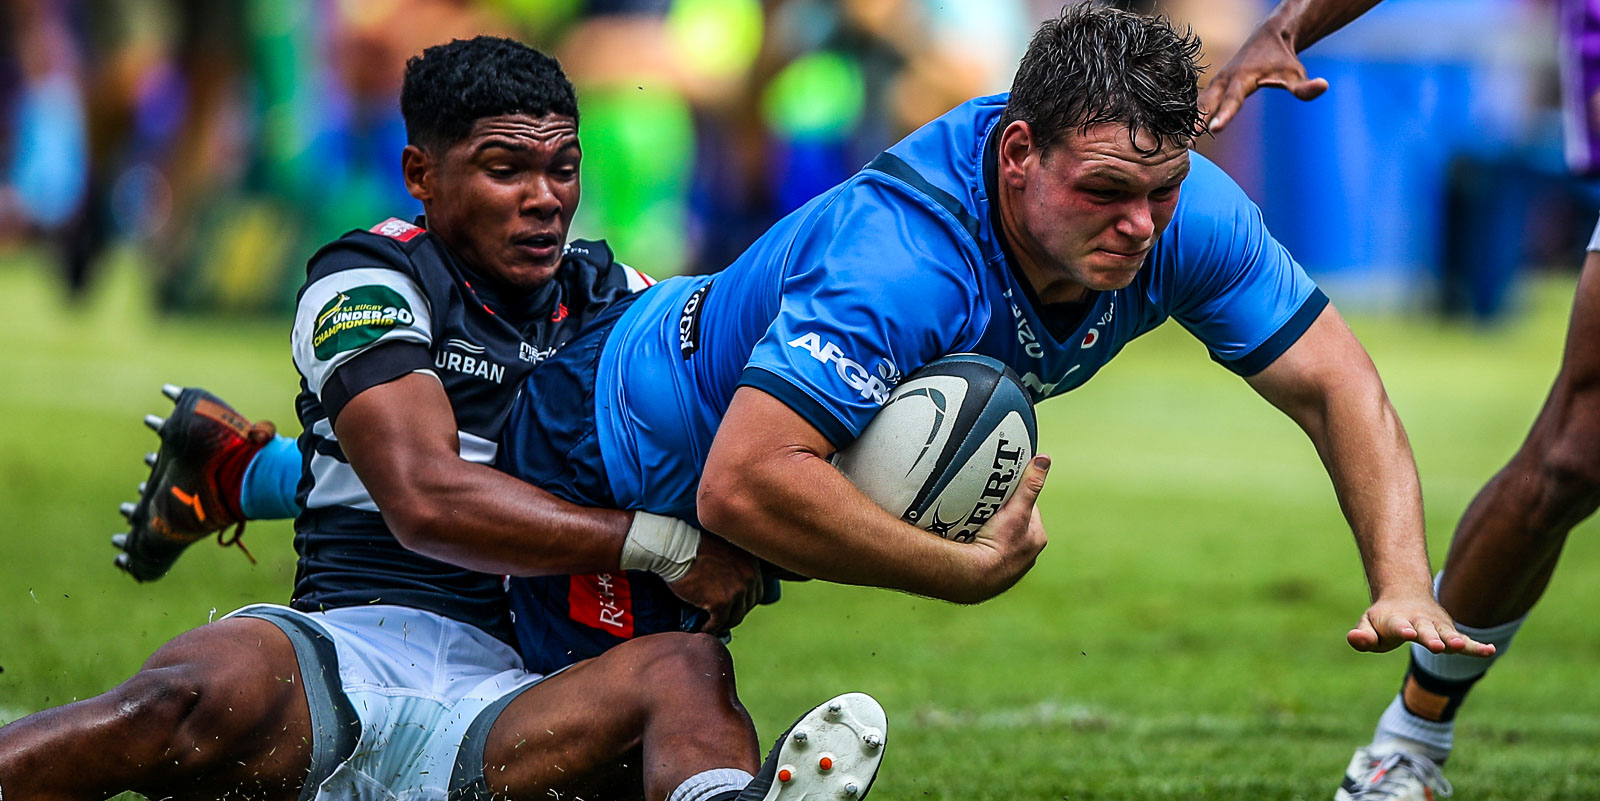 The Vodacom Bulls U20s beat their Cell C Sharks counterparts in Pretoria in the third round of the SA Rugby U20 Cup.